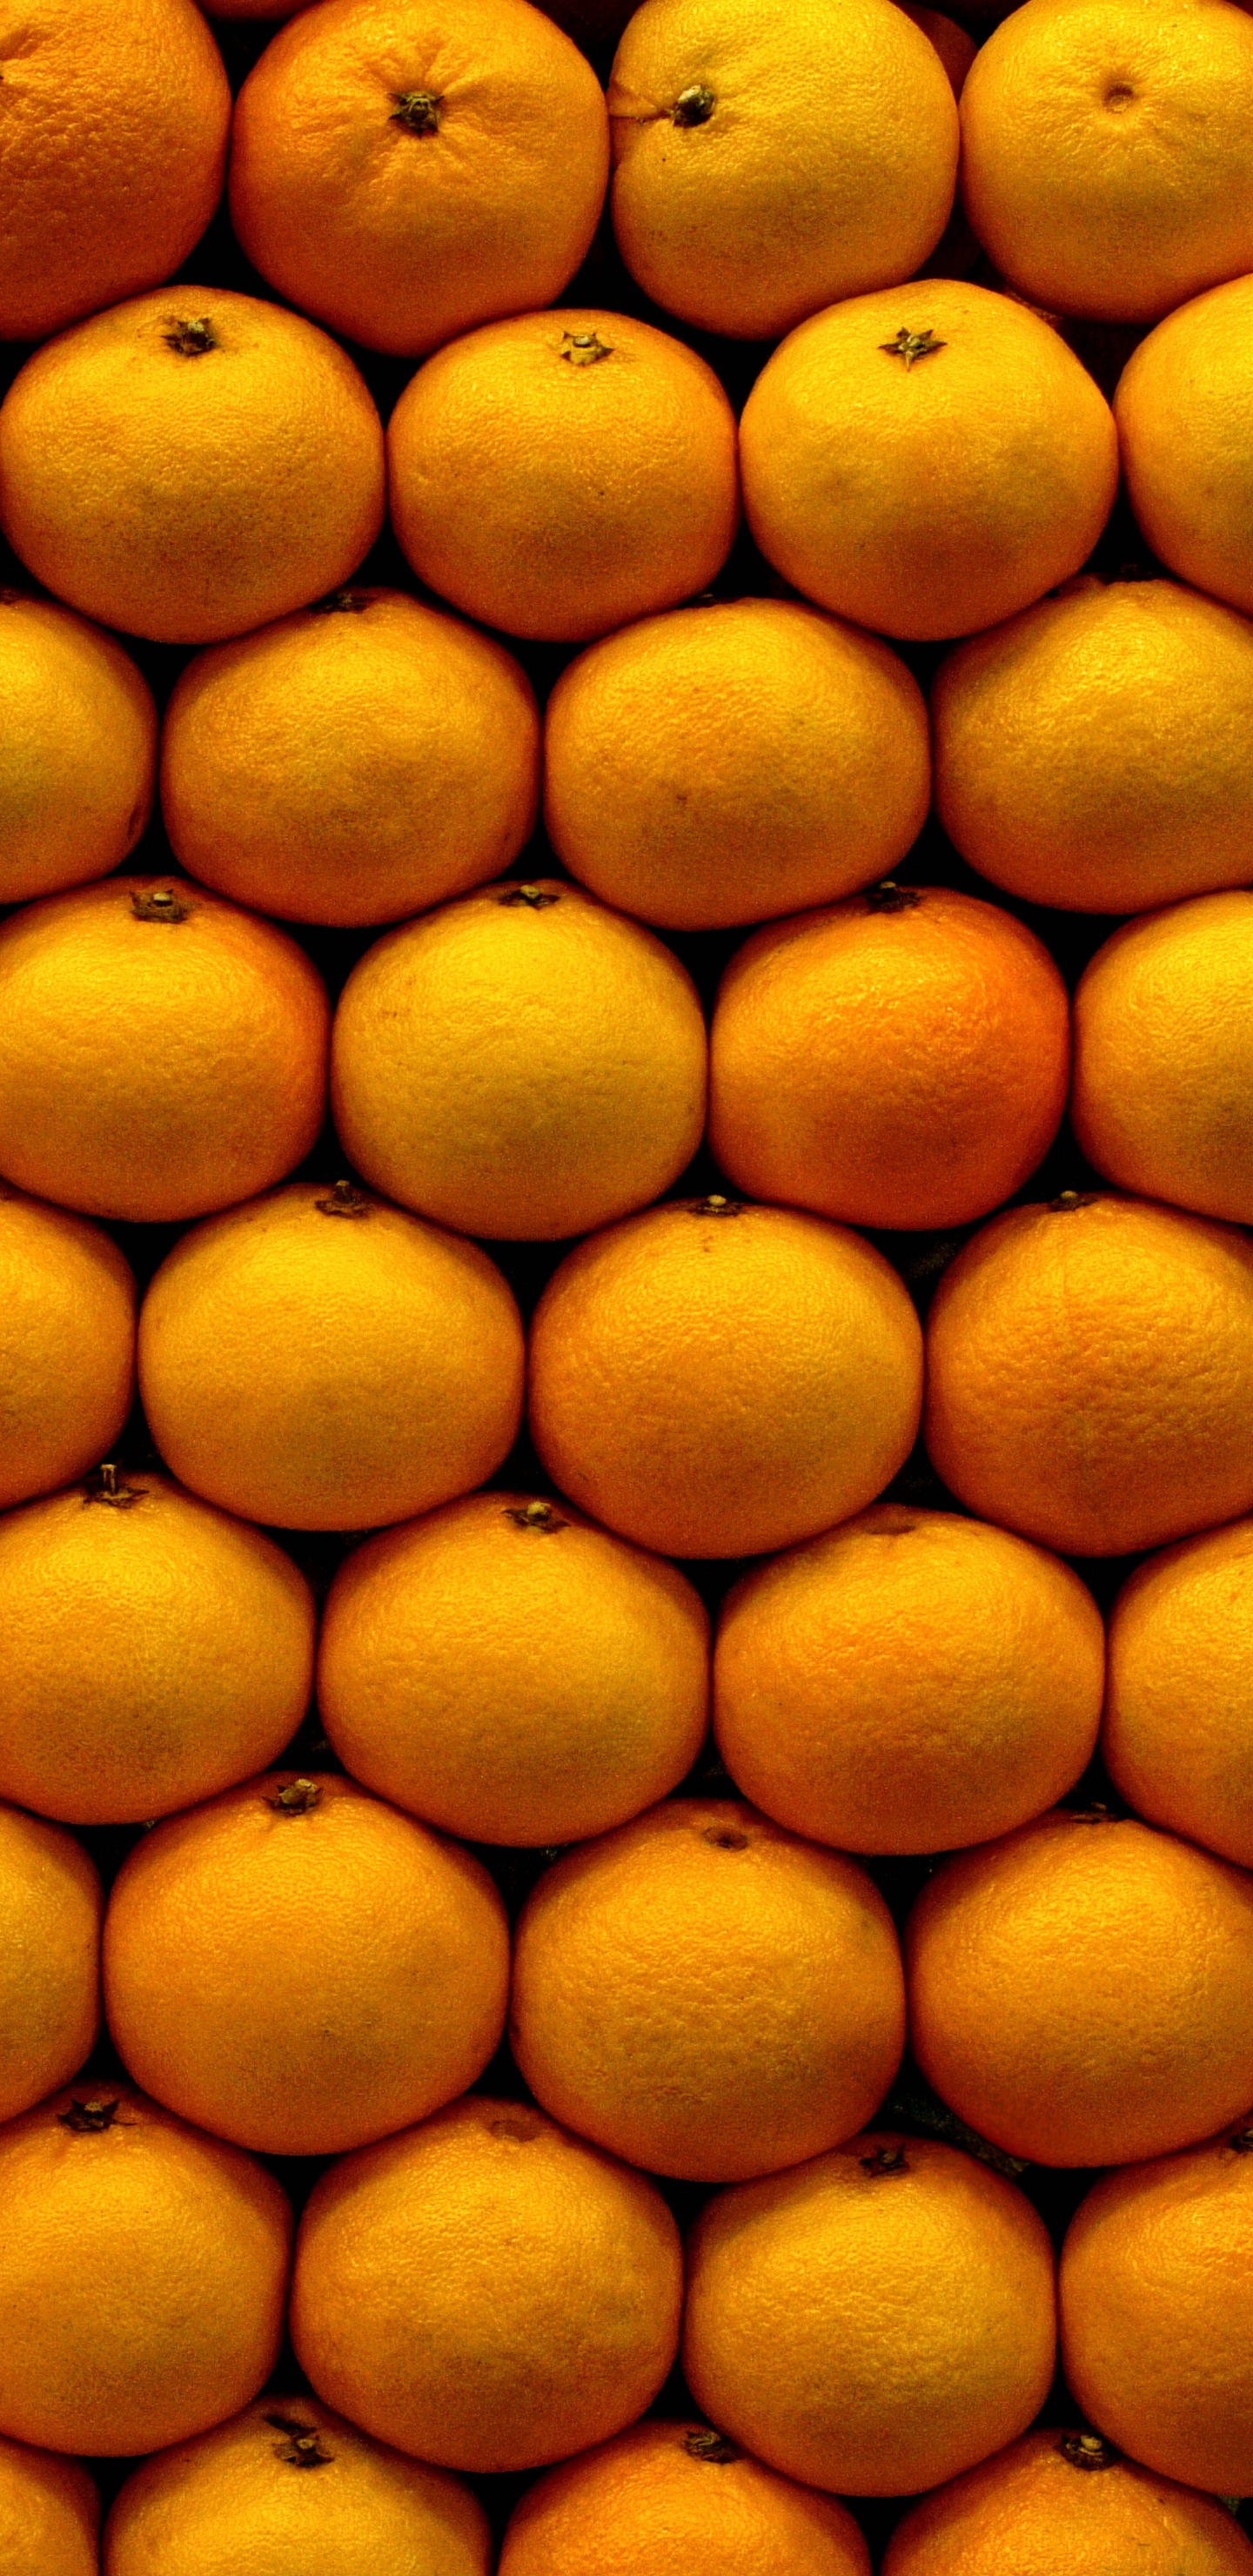 Yellow Round Fruits on White Surface. Wallpaper in 1440x2960 Resolution